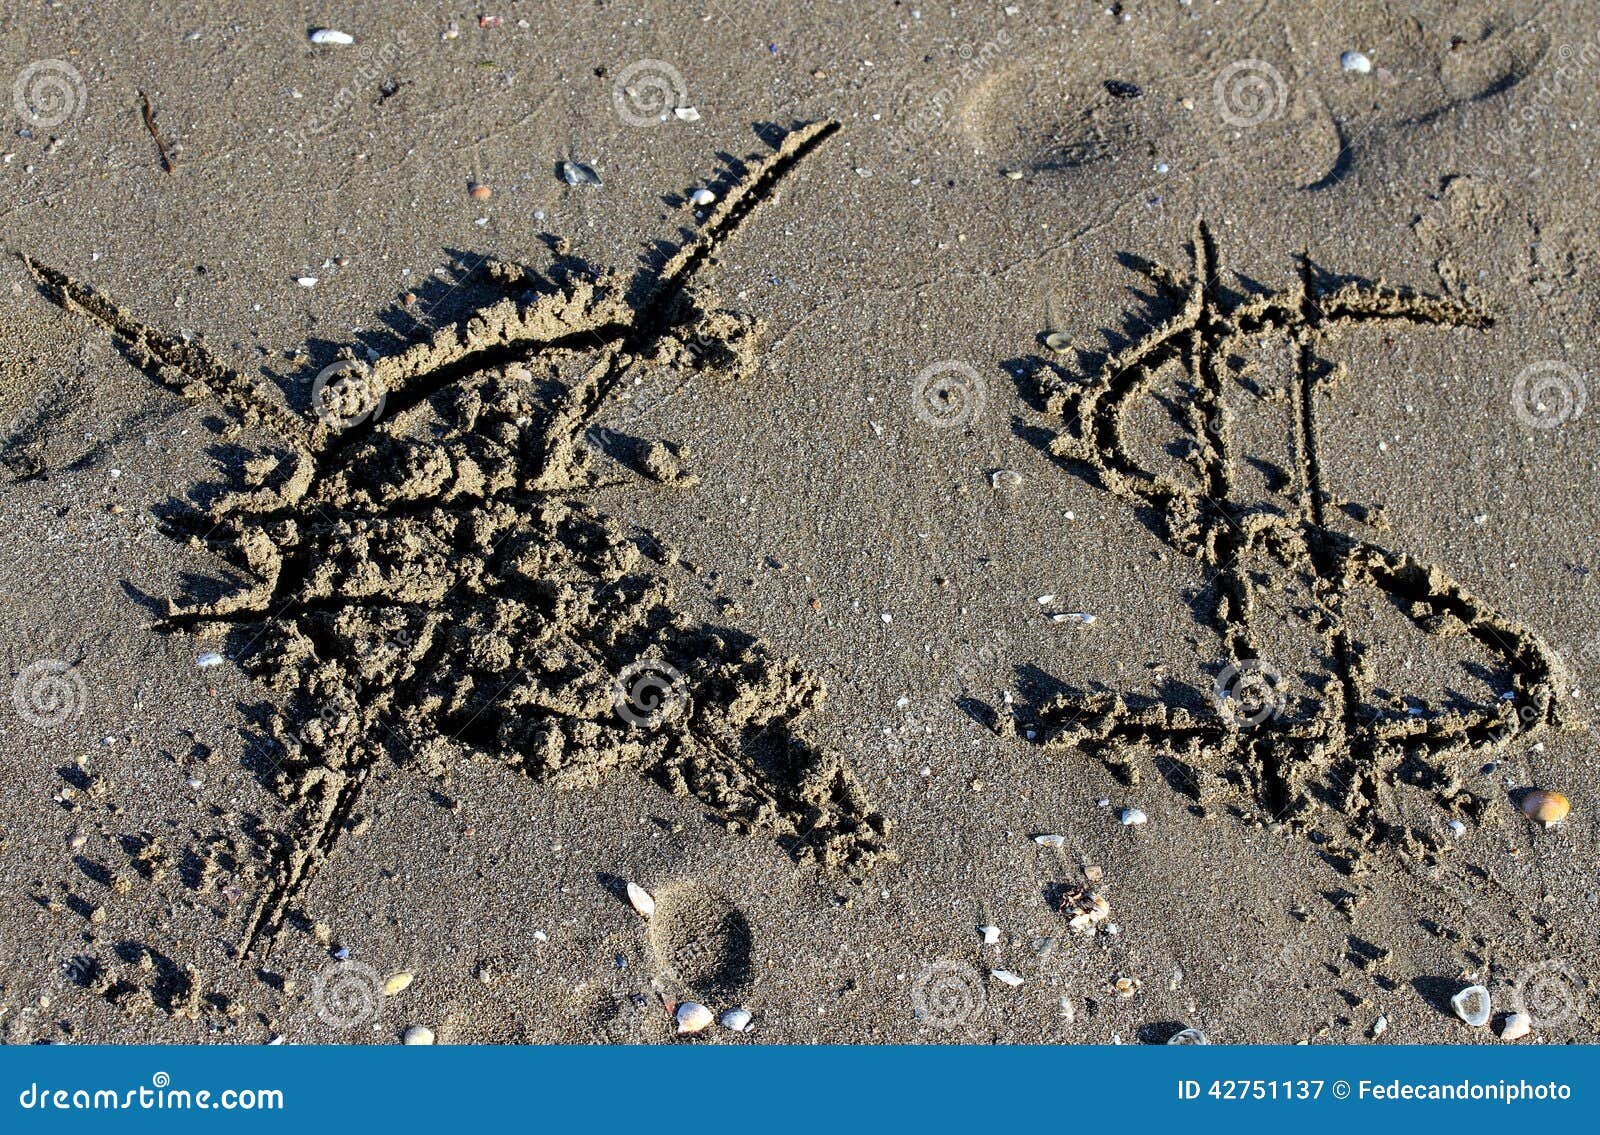 euro  erased and the dollar sign on the beach